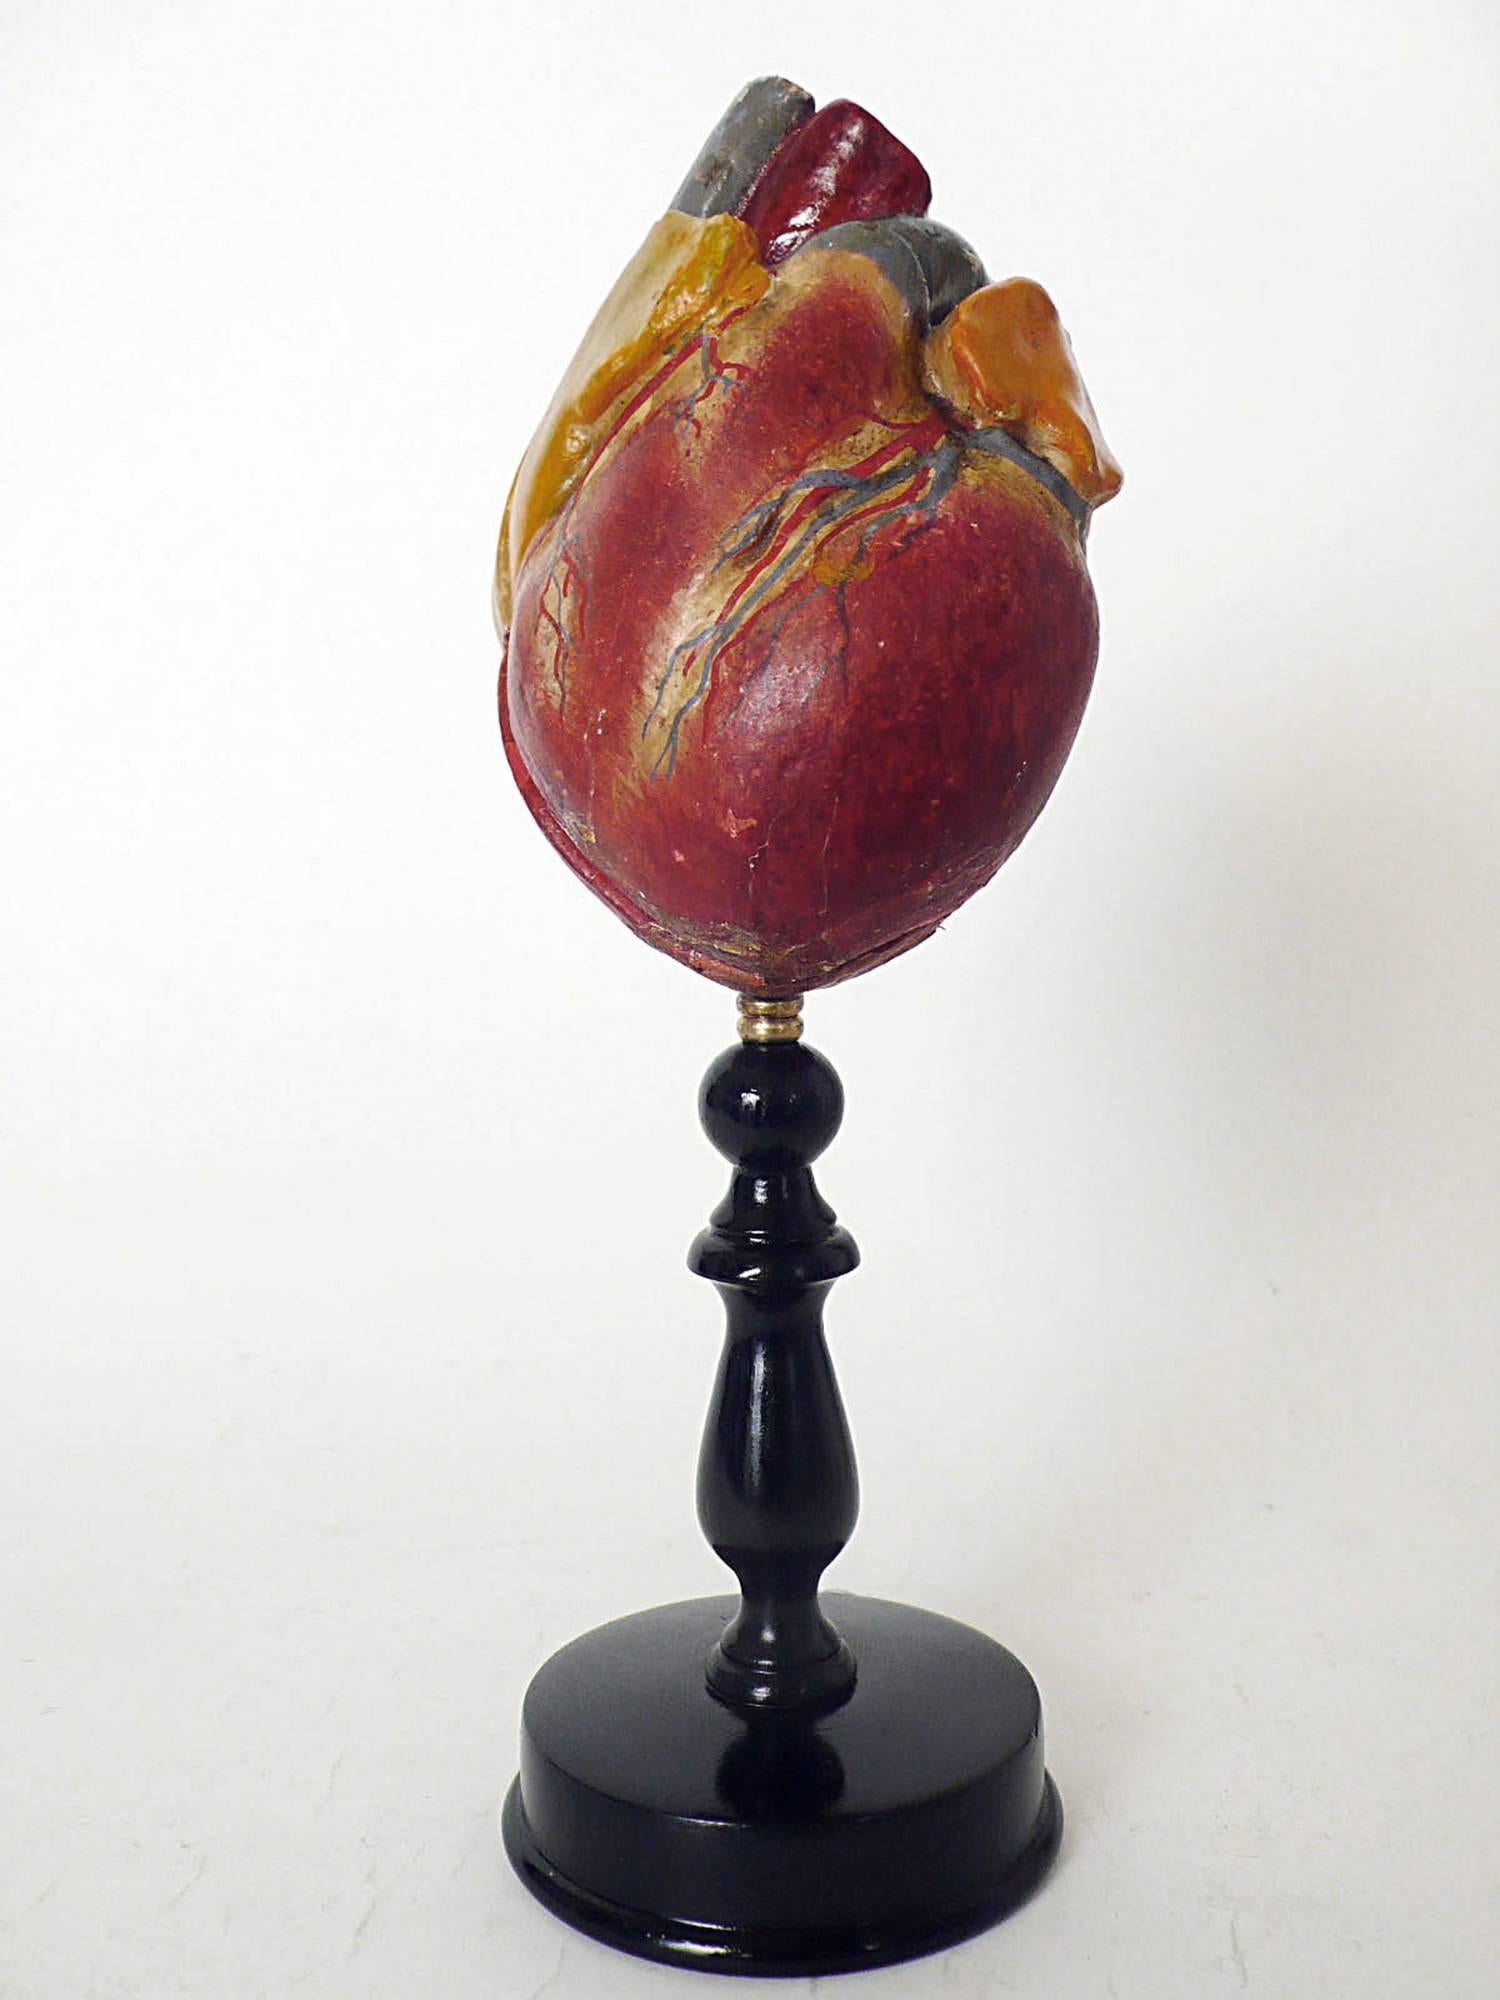 Anatomic model for class, depicting a man’s heart, made out of plaster and painted papier mâché, mounted over a black round wooden base.